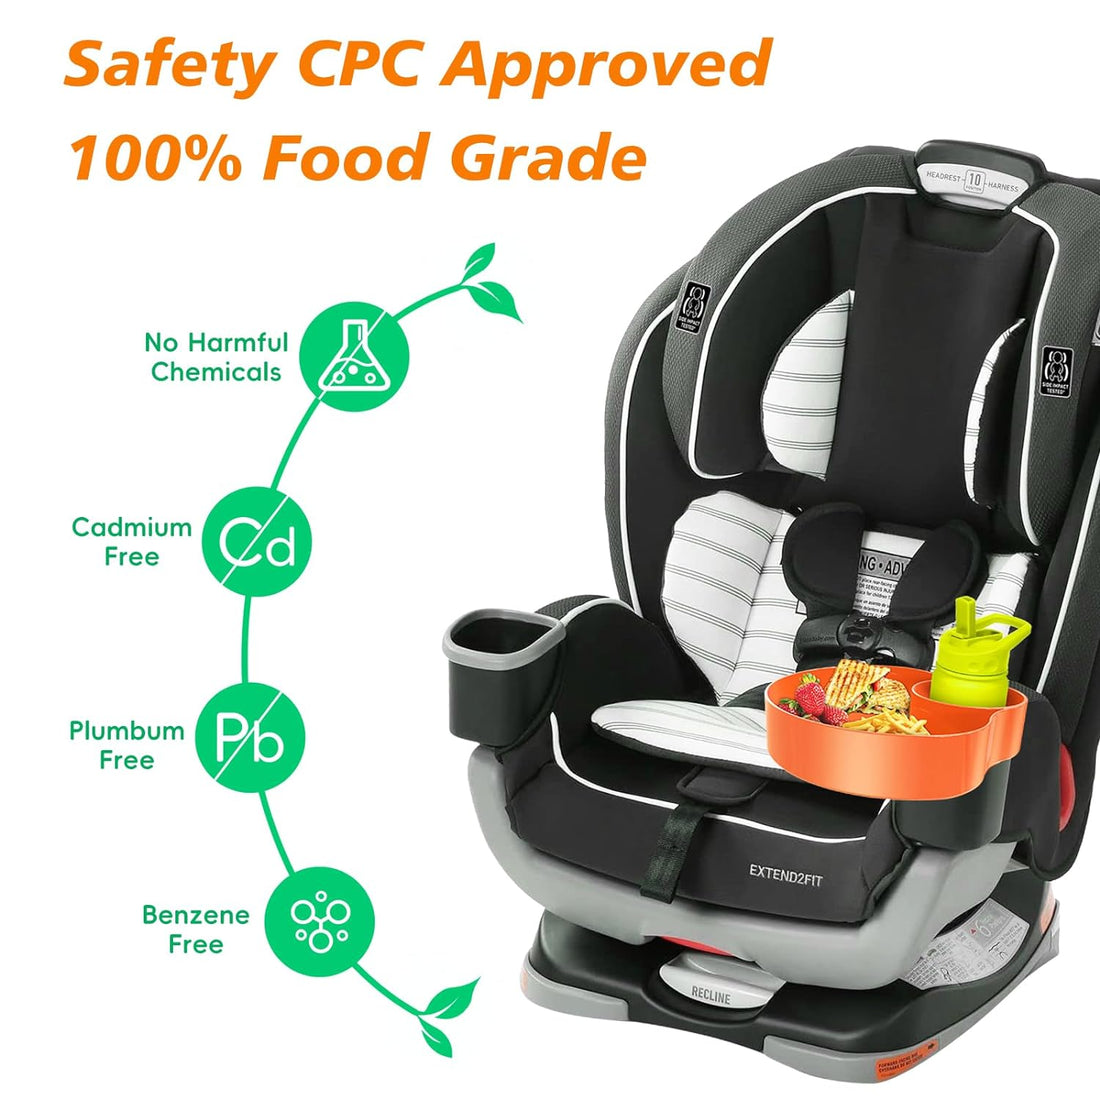 Car Seat Tray Cup Holder for Snacks/Drinks/Entertainment/Toys: 1 Food Tray&2 Cup Holder Bases, Carseat Trays for Kids Travel, Quickly Install Universal Fit for Most Car Seats/Toddlers Strollers-Orange